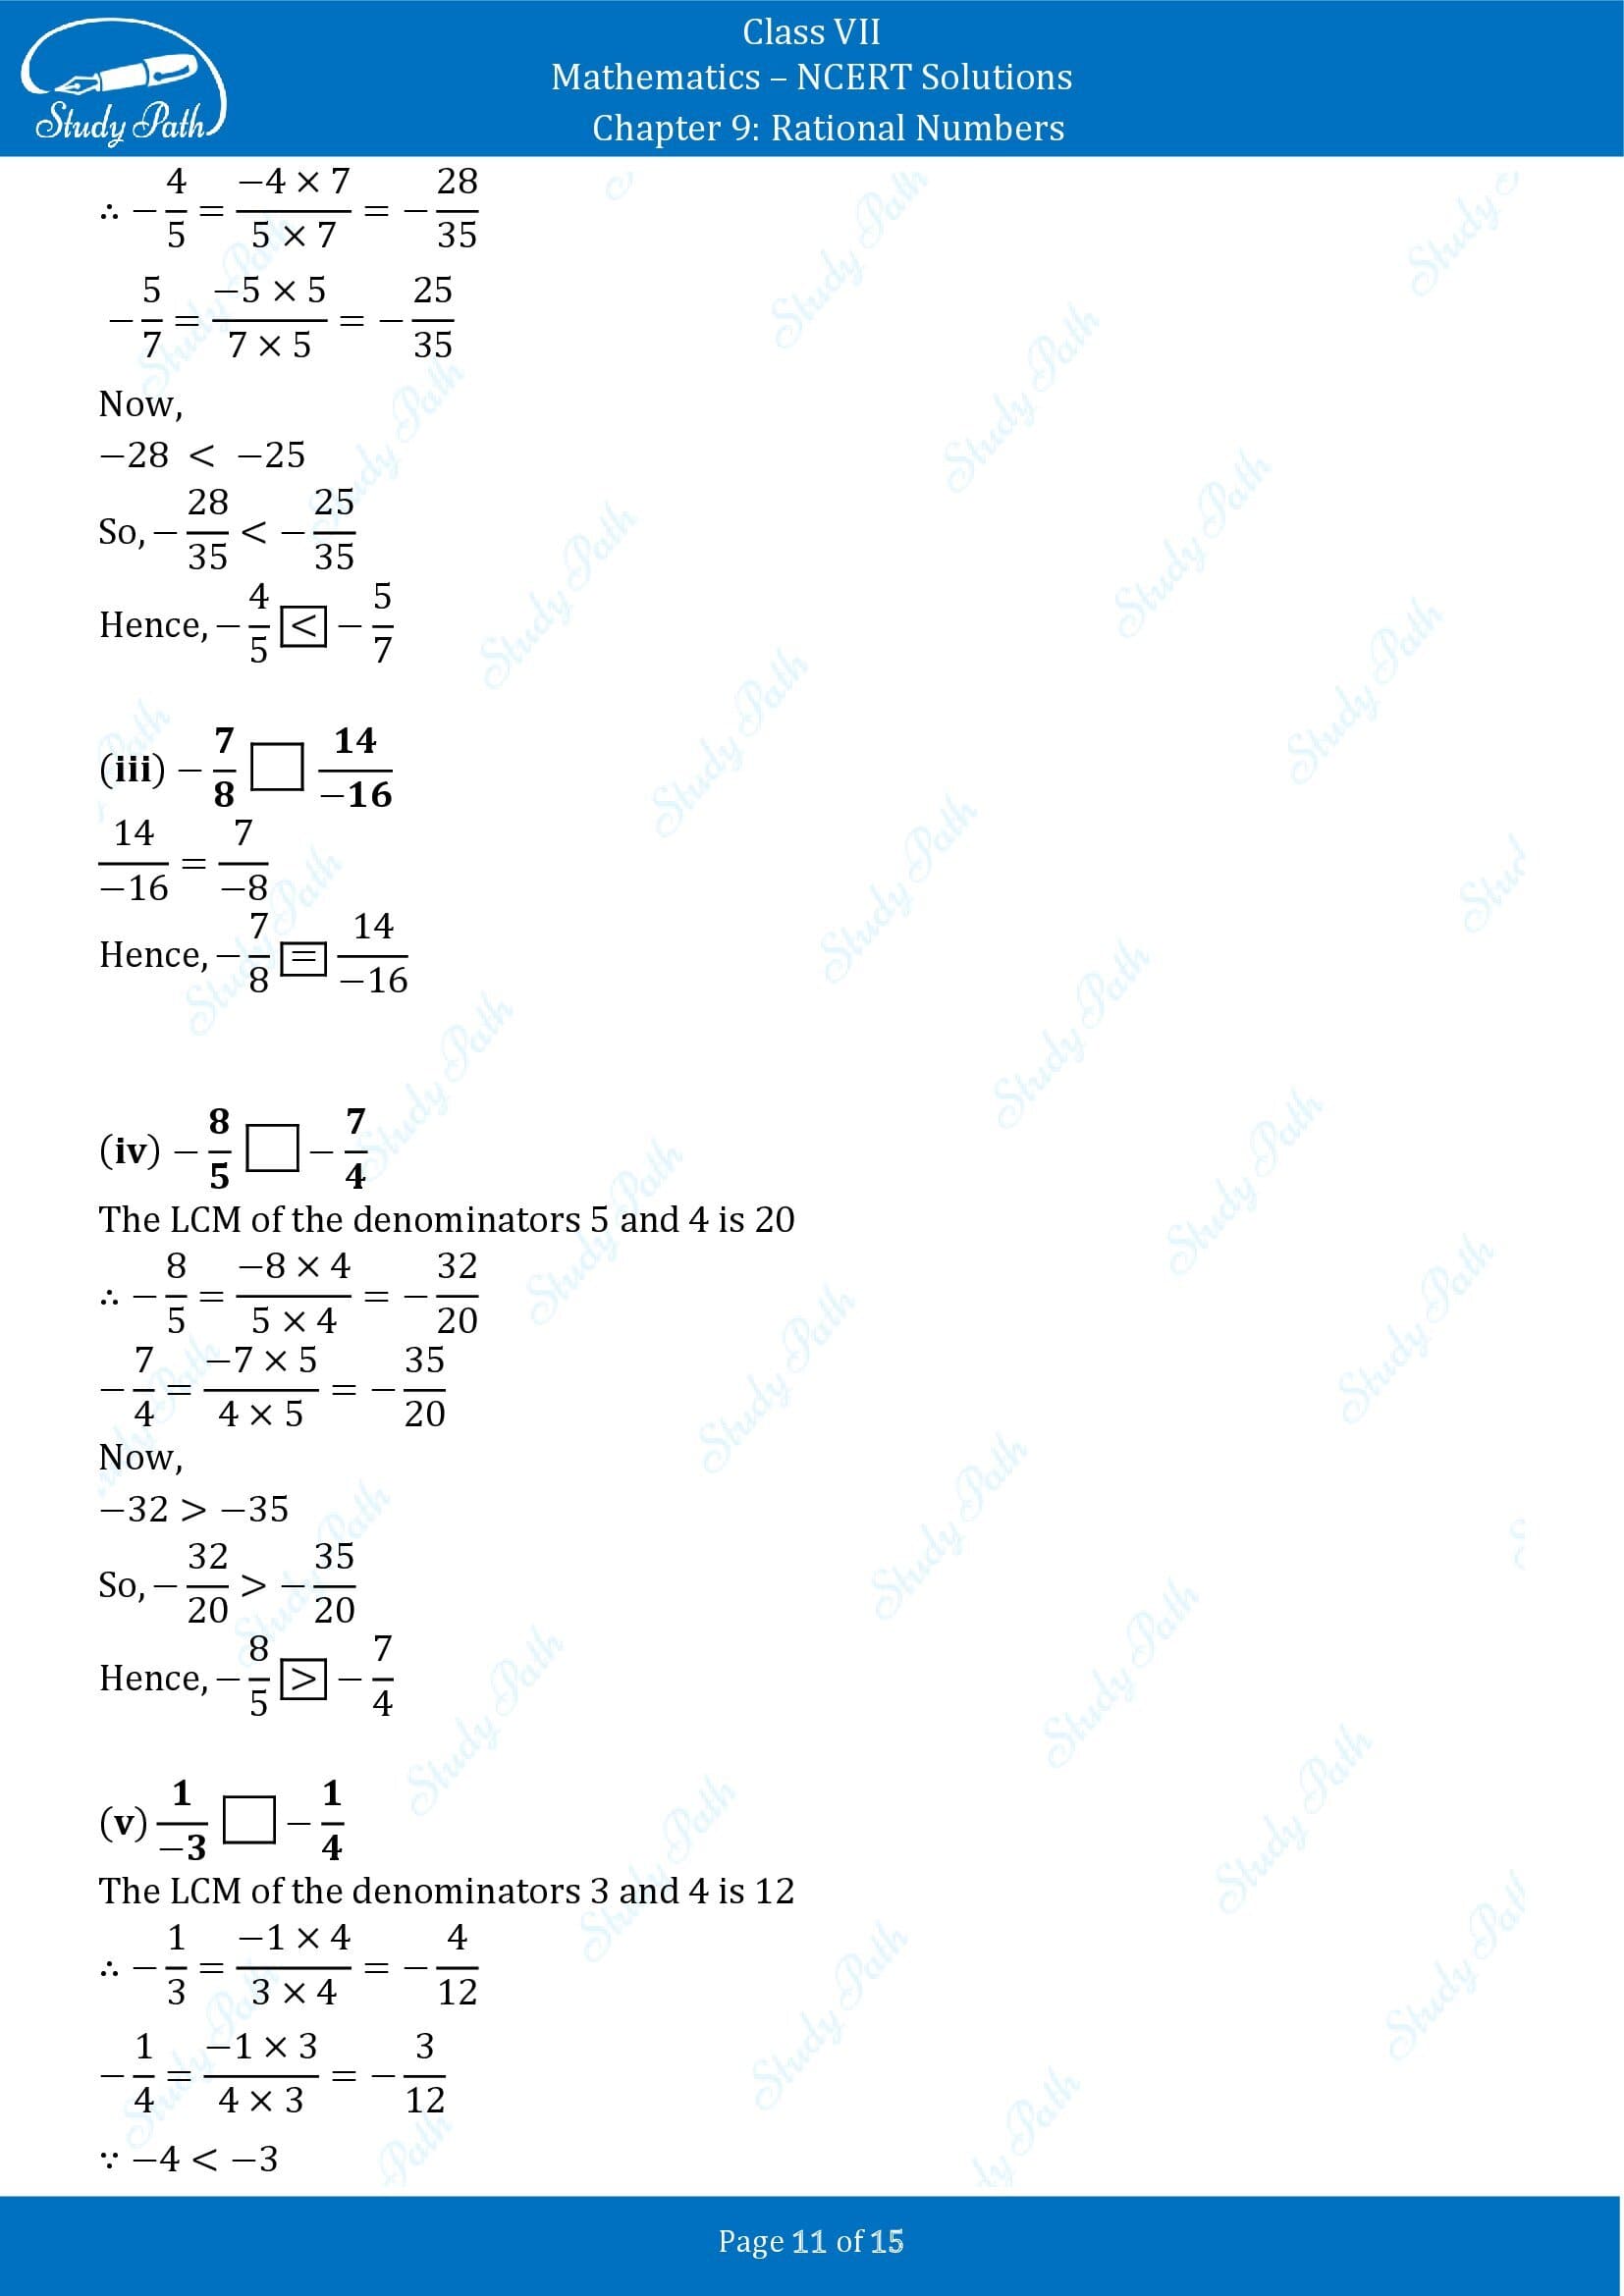 NCERT Solutions for Class 7 Maths Chapter 9 Rational Numbers Exercise 9.1 00011